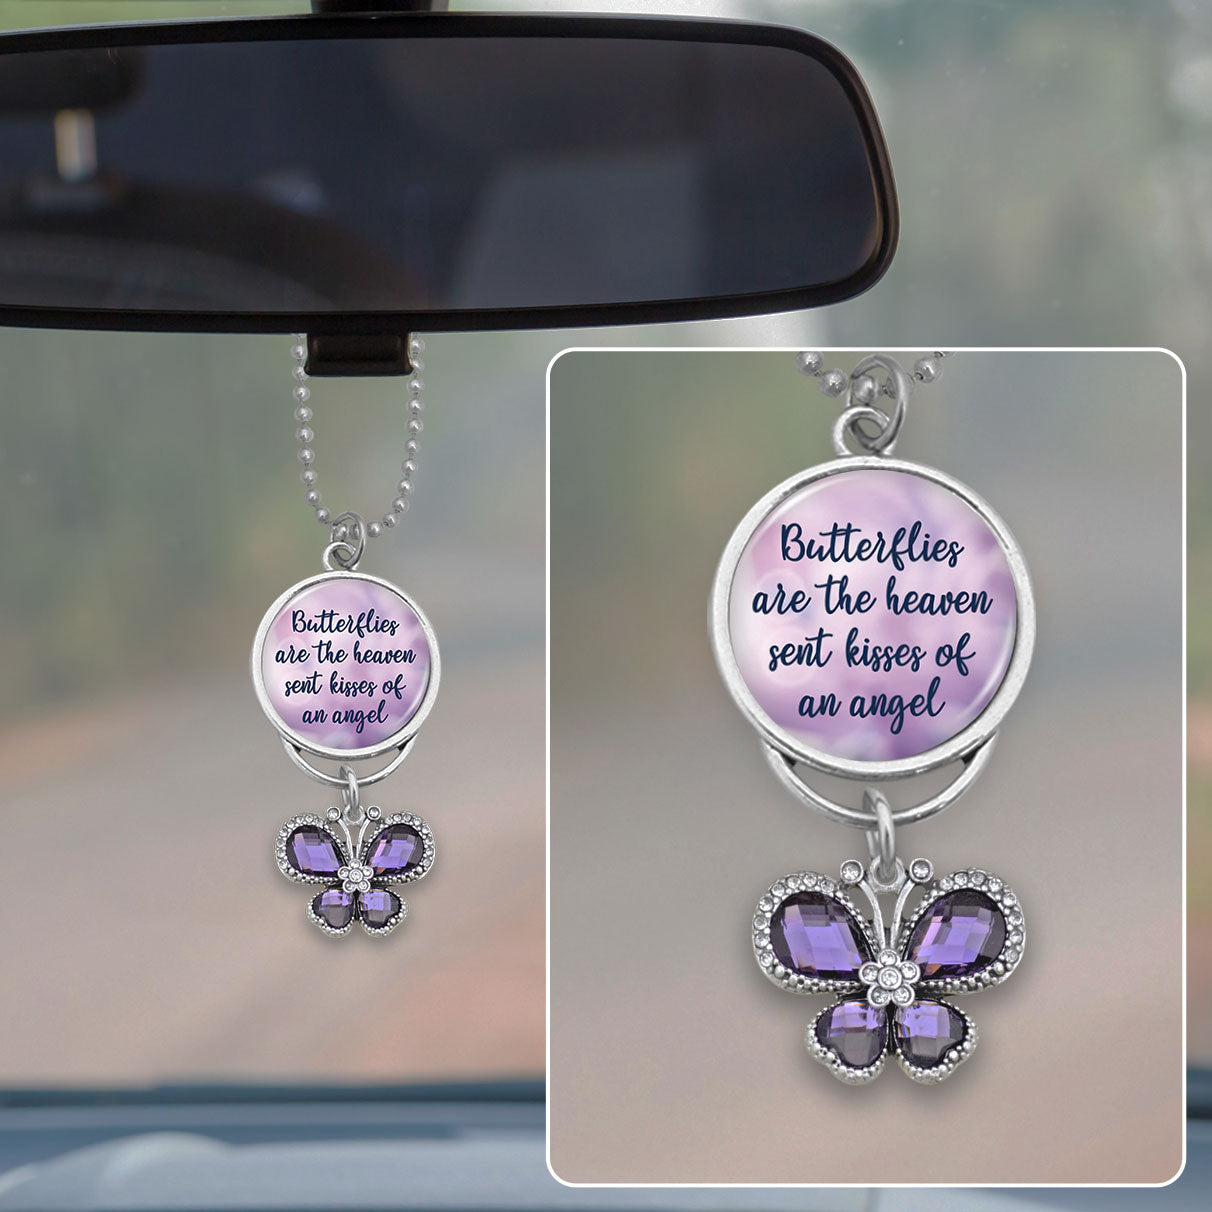 Butterflies Are The Heaven Sent Kisses Of An Angel Crystal Butterfly Rearview Mirror Charm